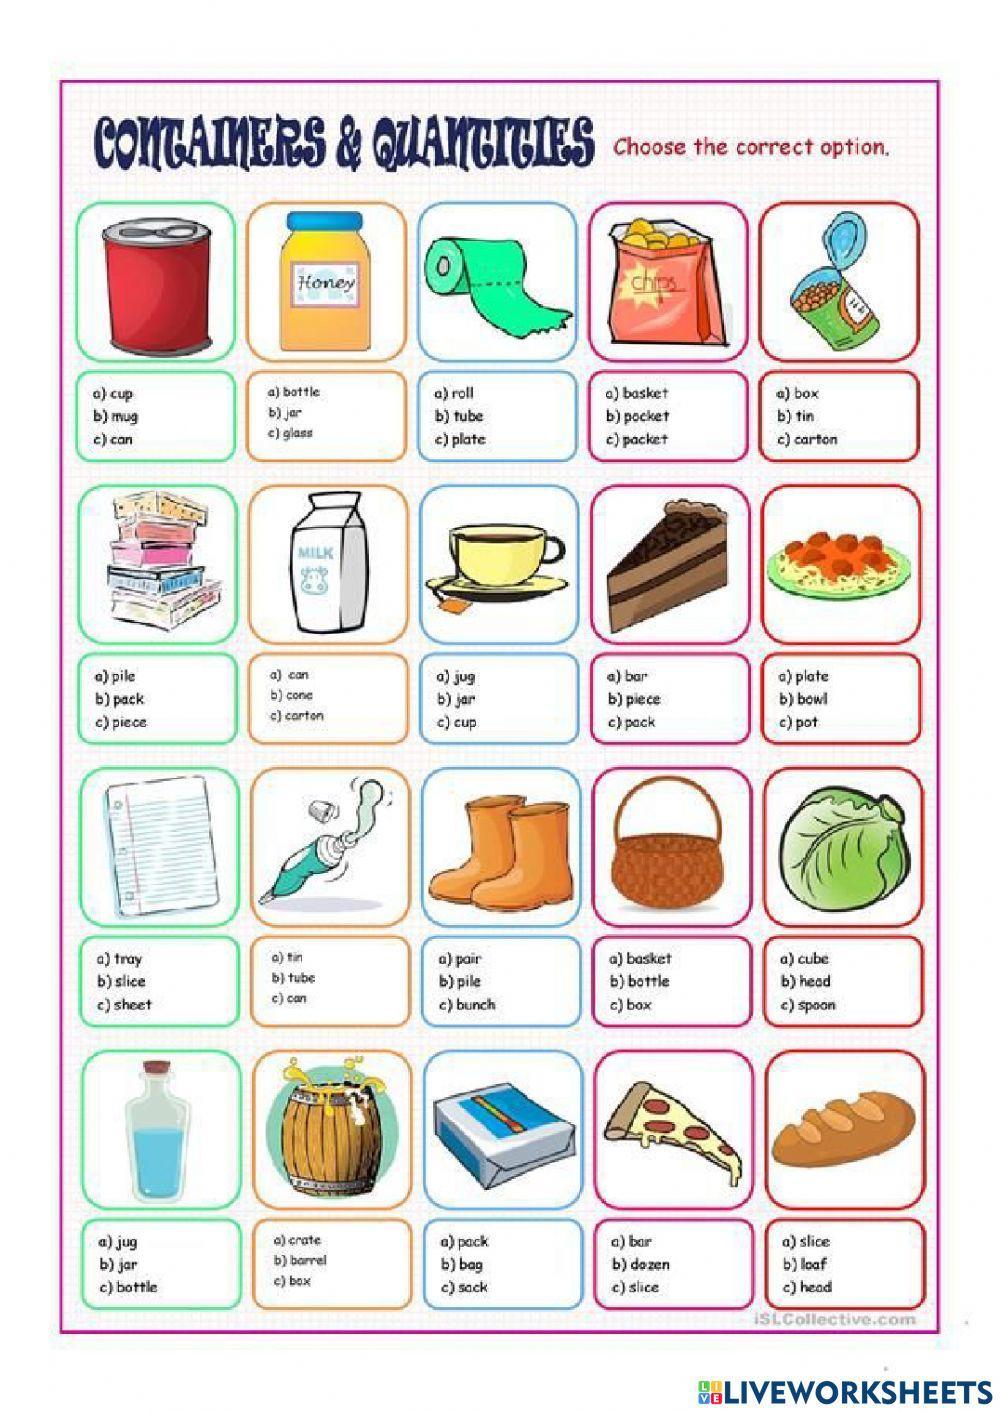 Hw-06-04-quantifiers of food & how much, how many